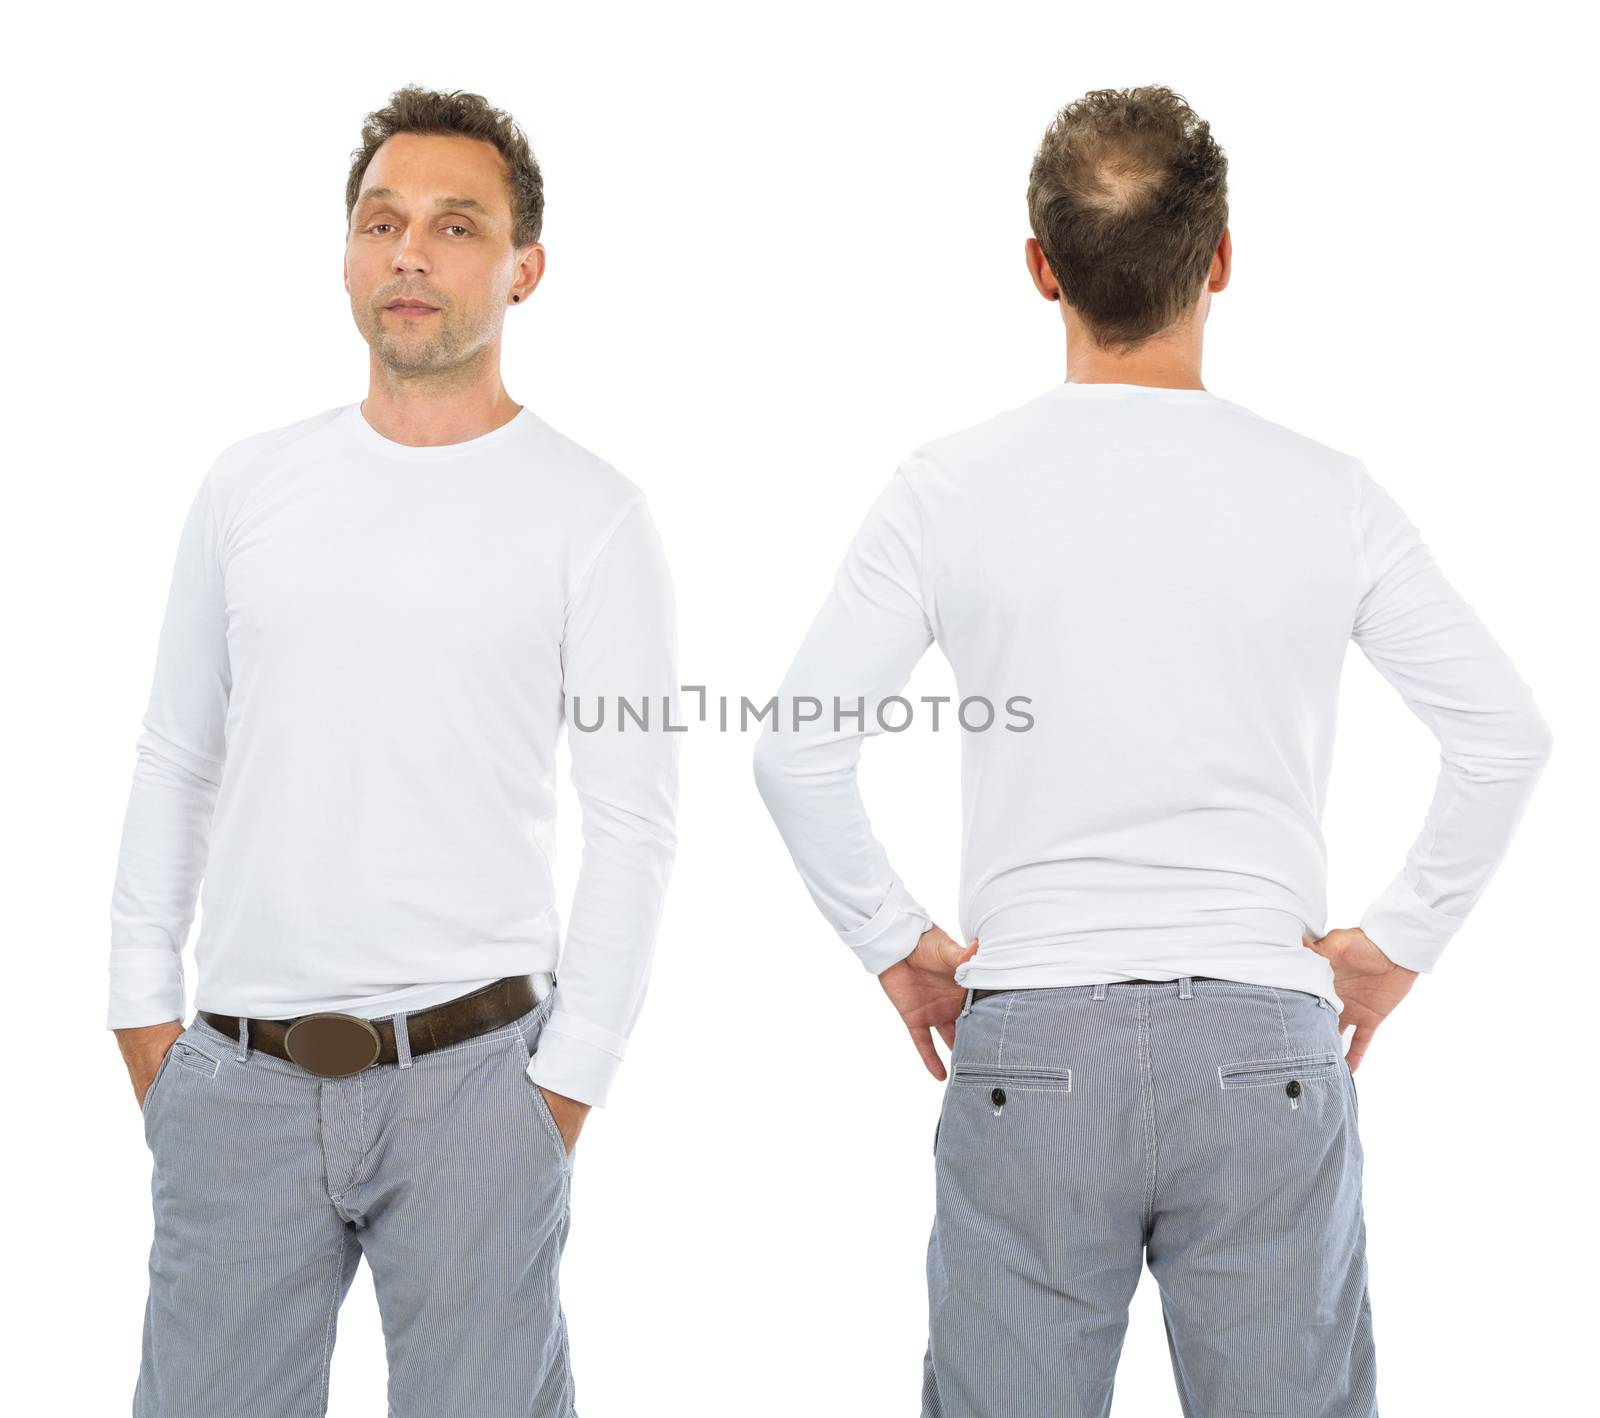 Photo of a man posing with a blank white long sleeve shirt, ready for your artwork or design.